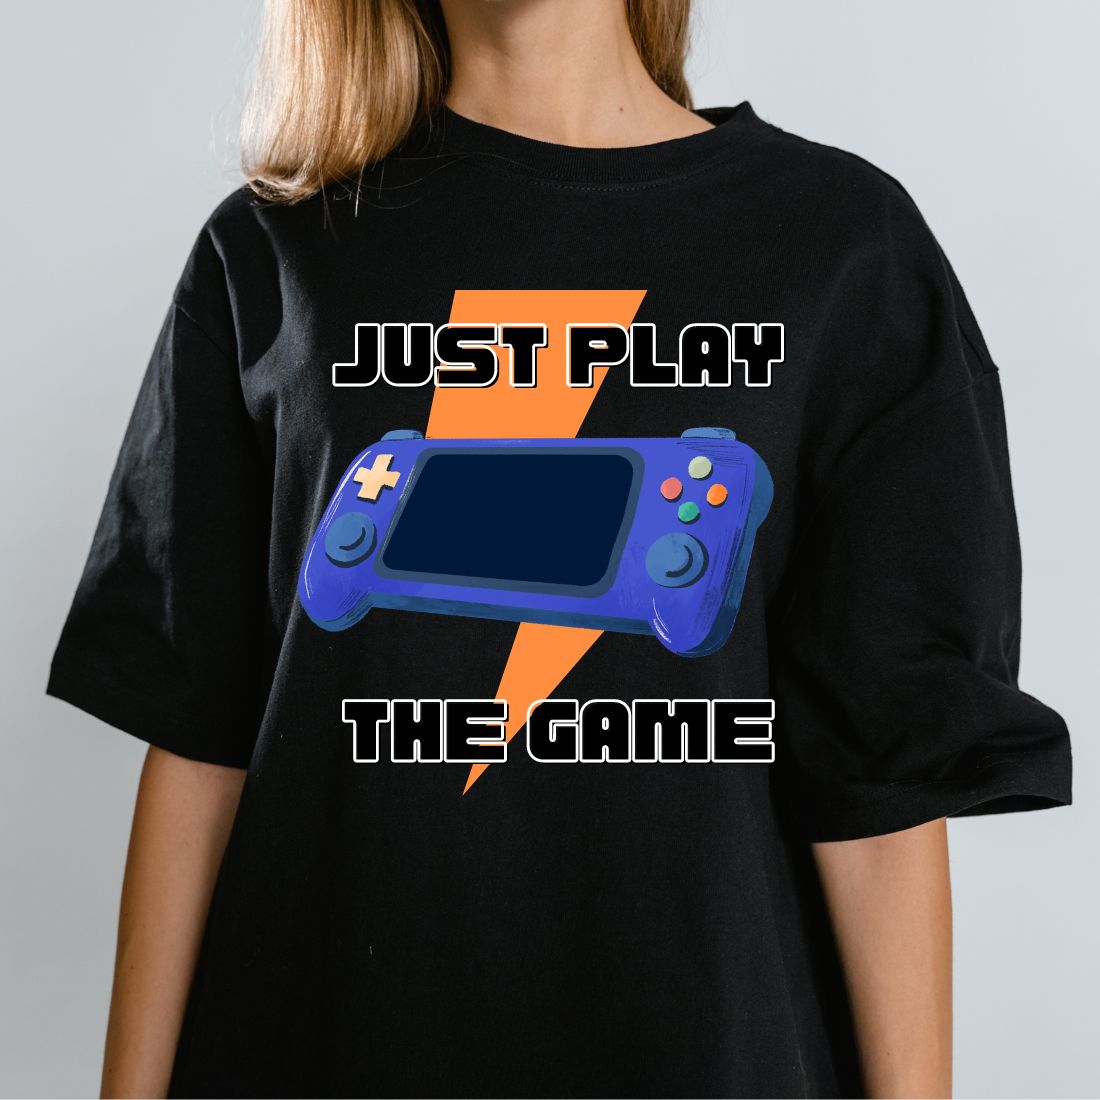 Just play the game t-shirt design preview image.